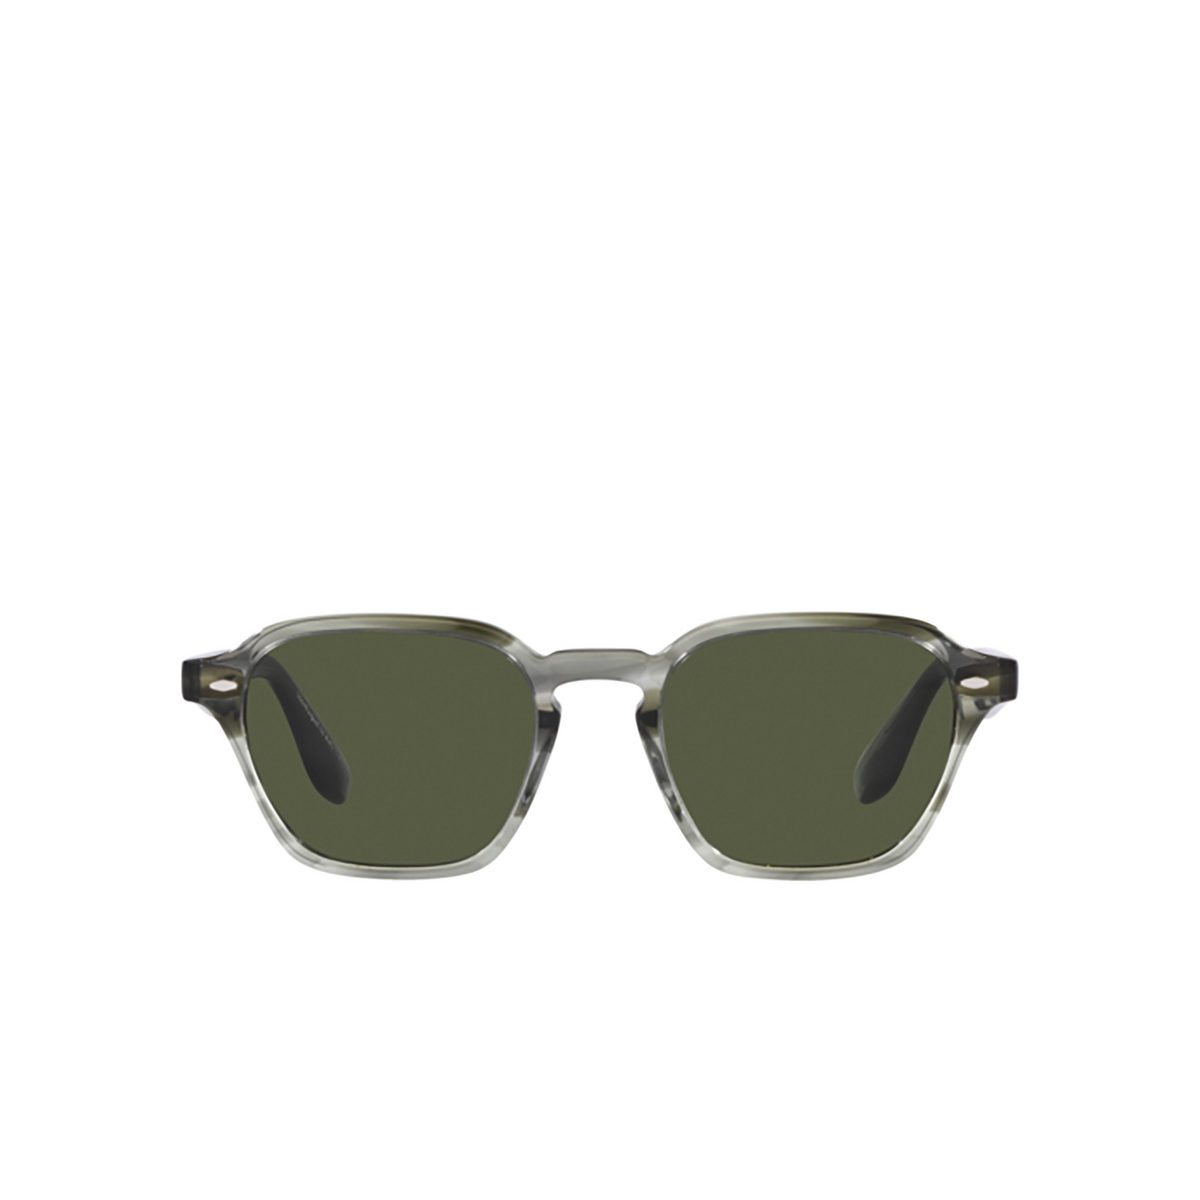 Occhiali da sole Oliver Peoples GRIFFO 170552 Washed jade - frontale